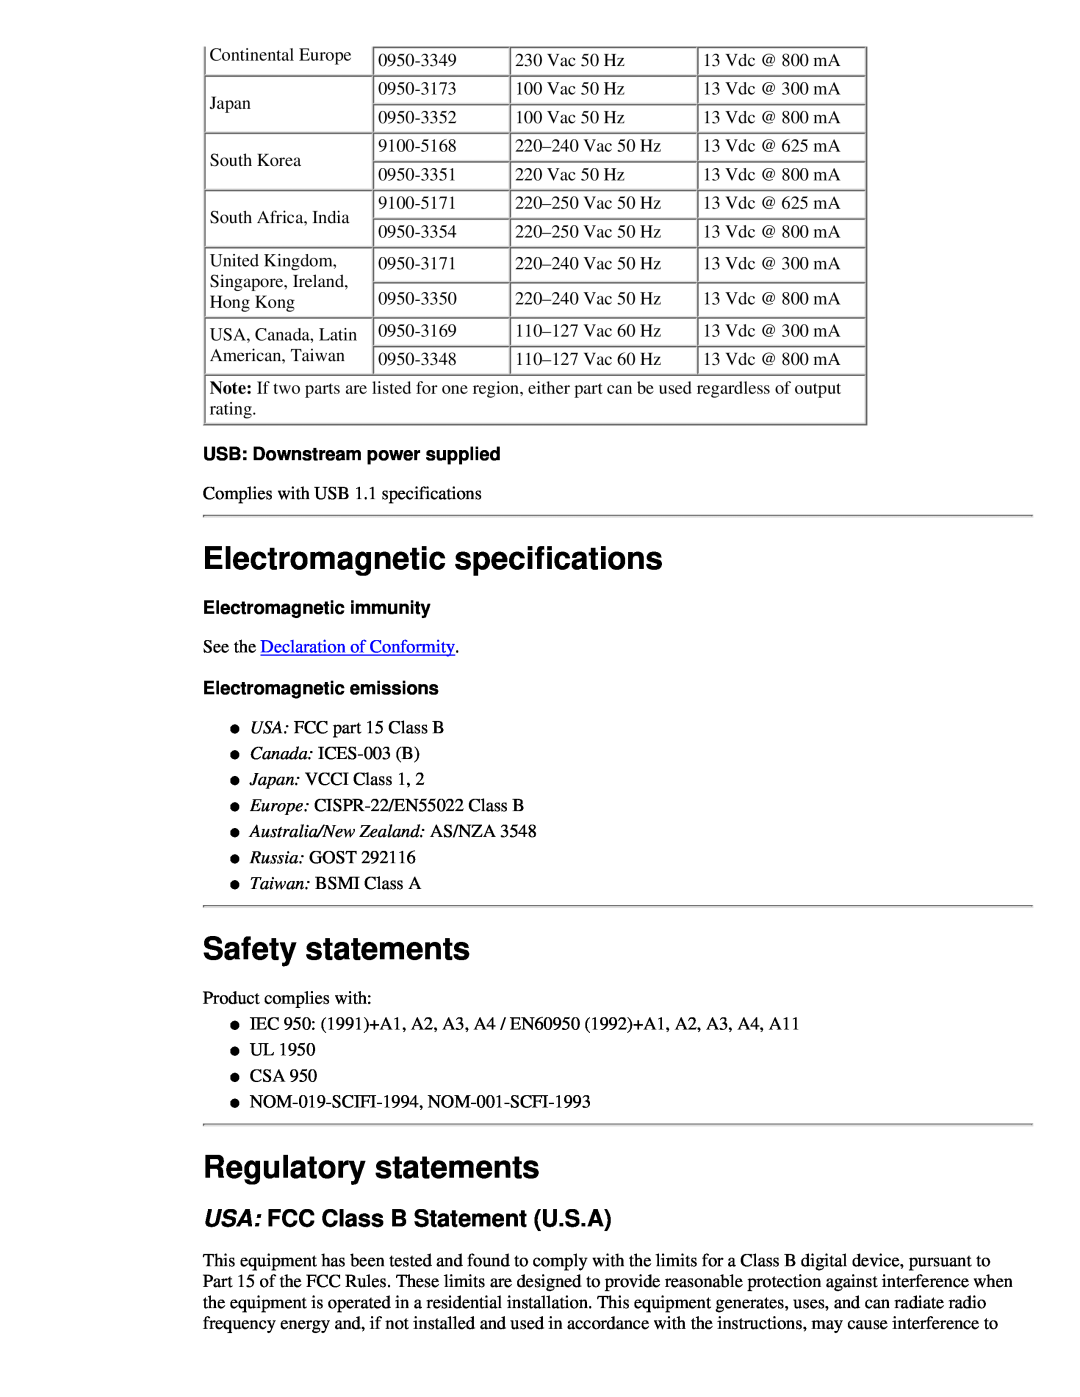 HP 310X, 175X Electromagnetic specifications, Safety statements, Regulatory statements, USA FCC Class B Statement U.S.A 